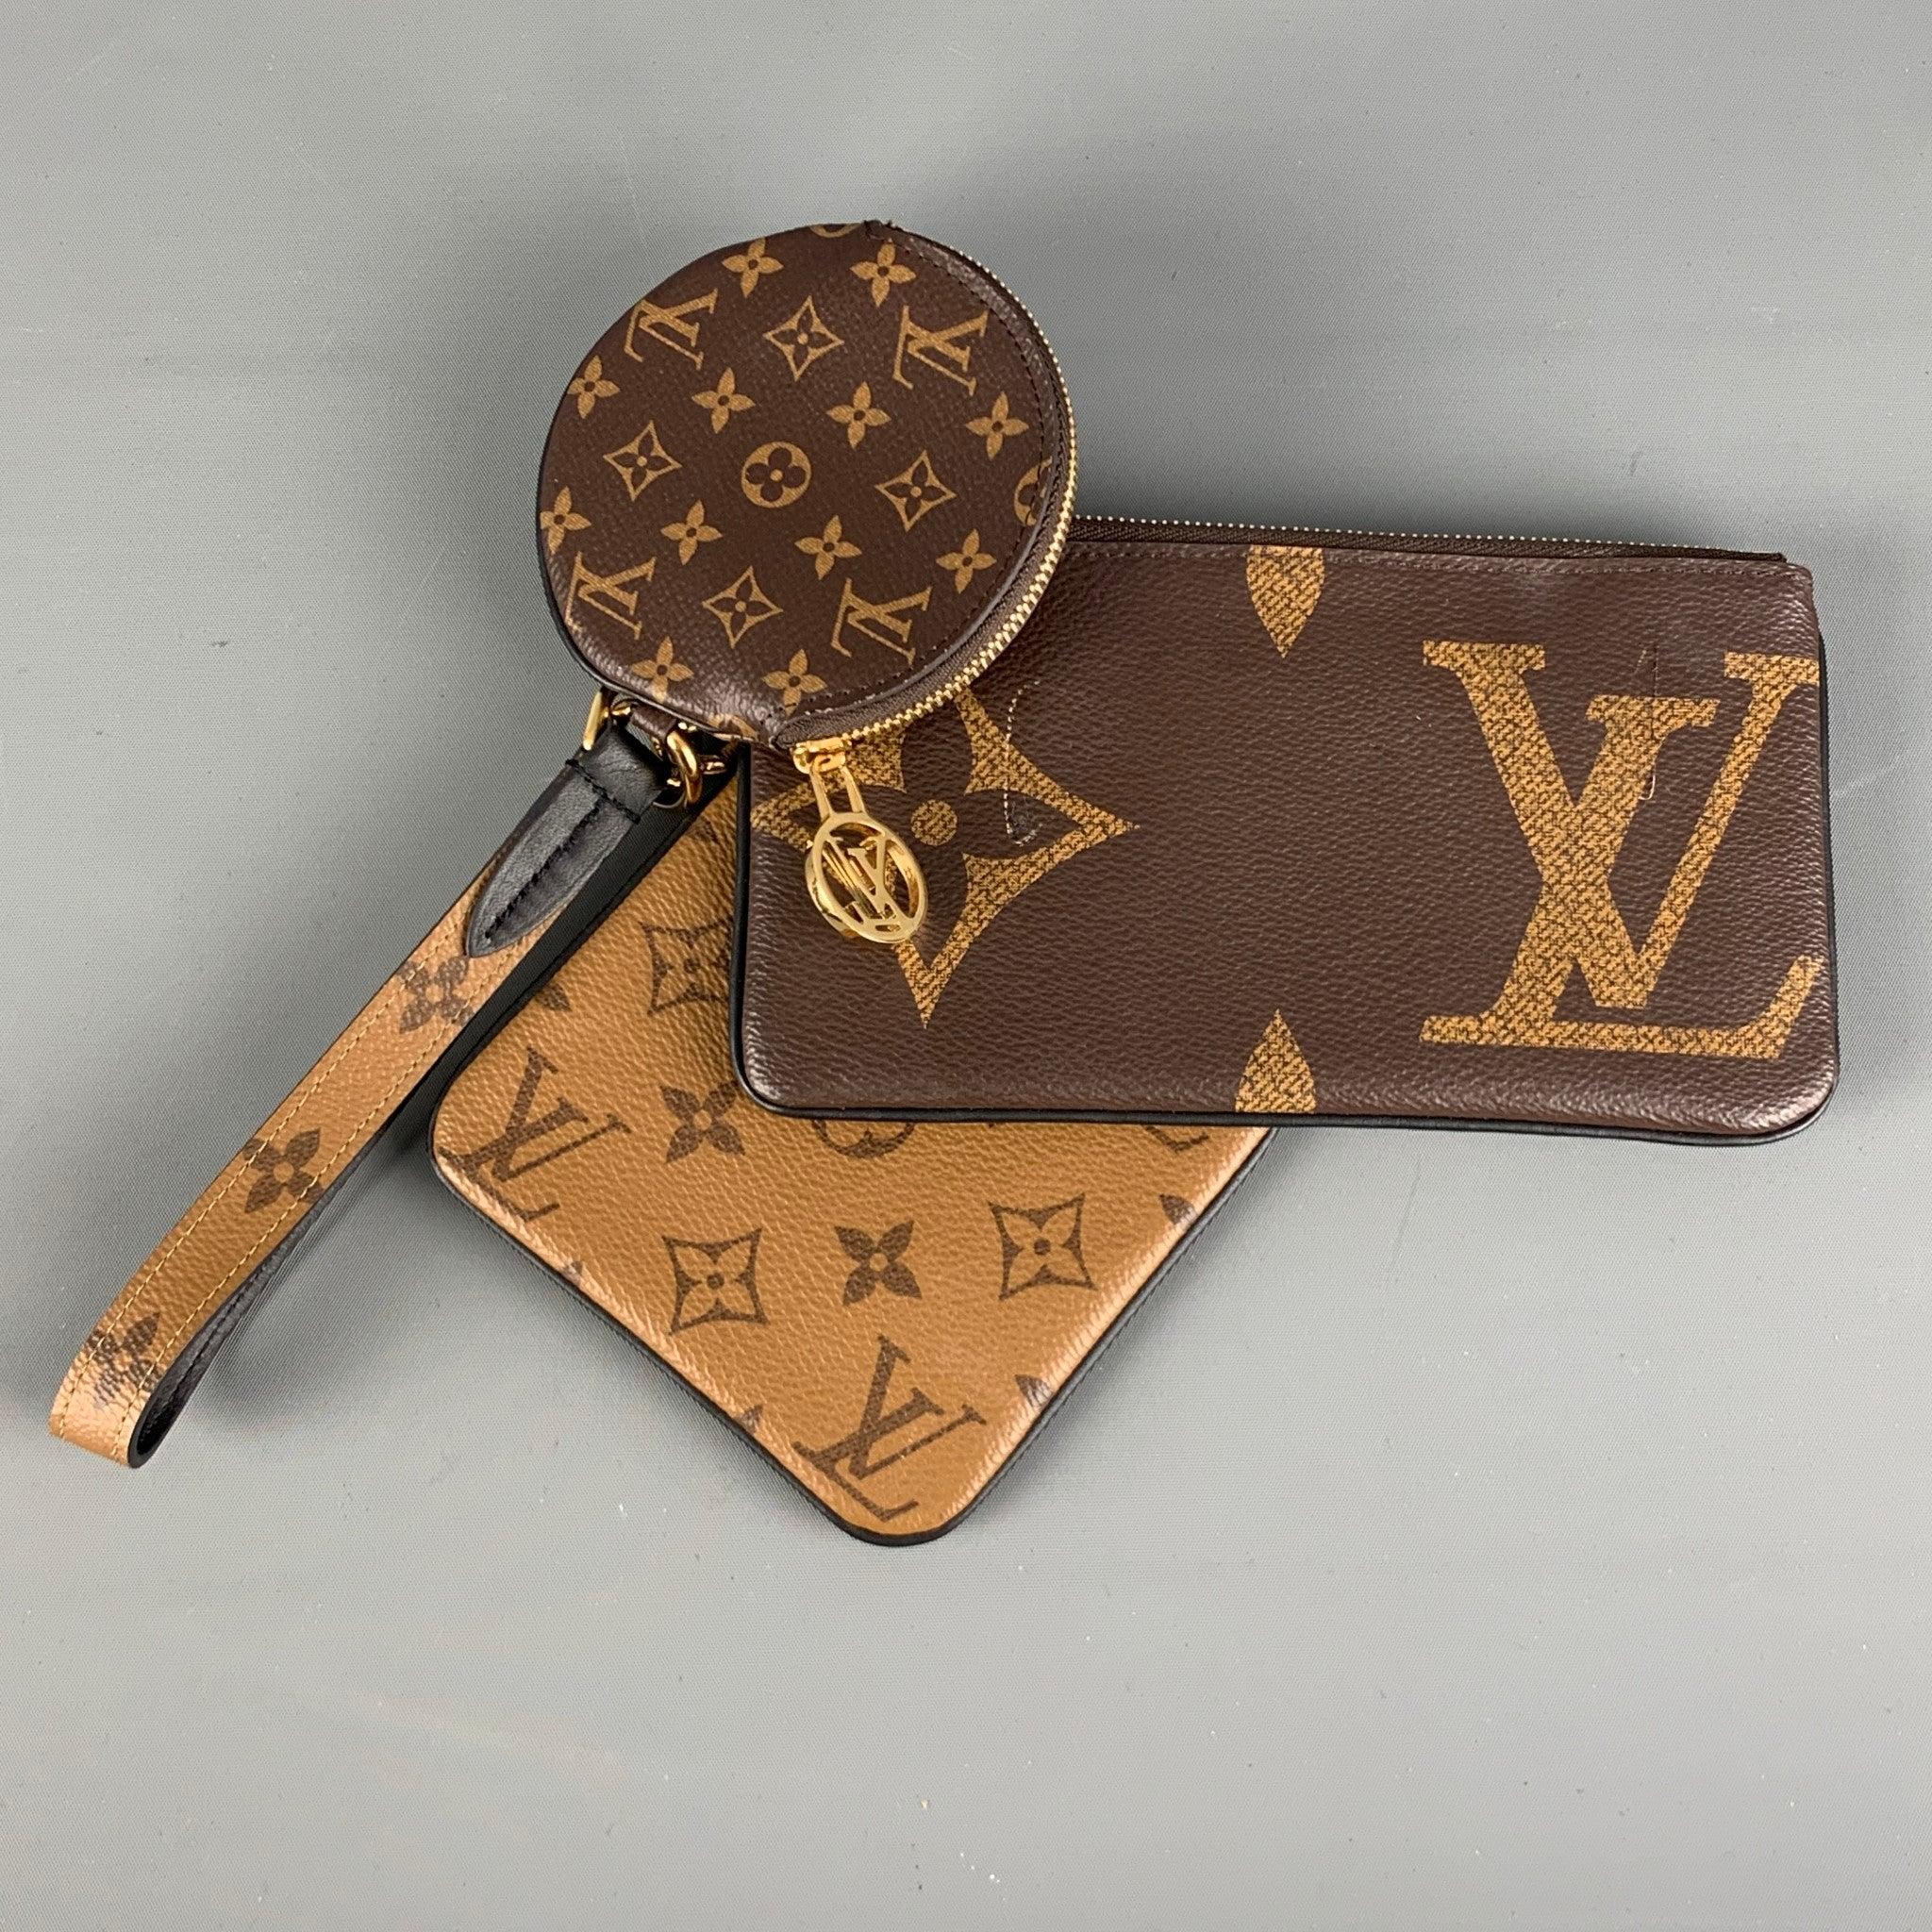 LOUIS VUITTON Trio Pouch Reverse Monogram handbag comes in a brown signature monogram coated canvas leather featuring three different shapes and sizes rectangular, square and round, gold hardware and a wrist strap. Made in France.Very Good Pre-Owned